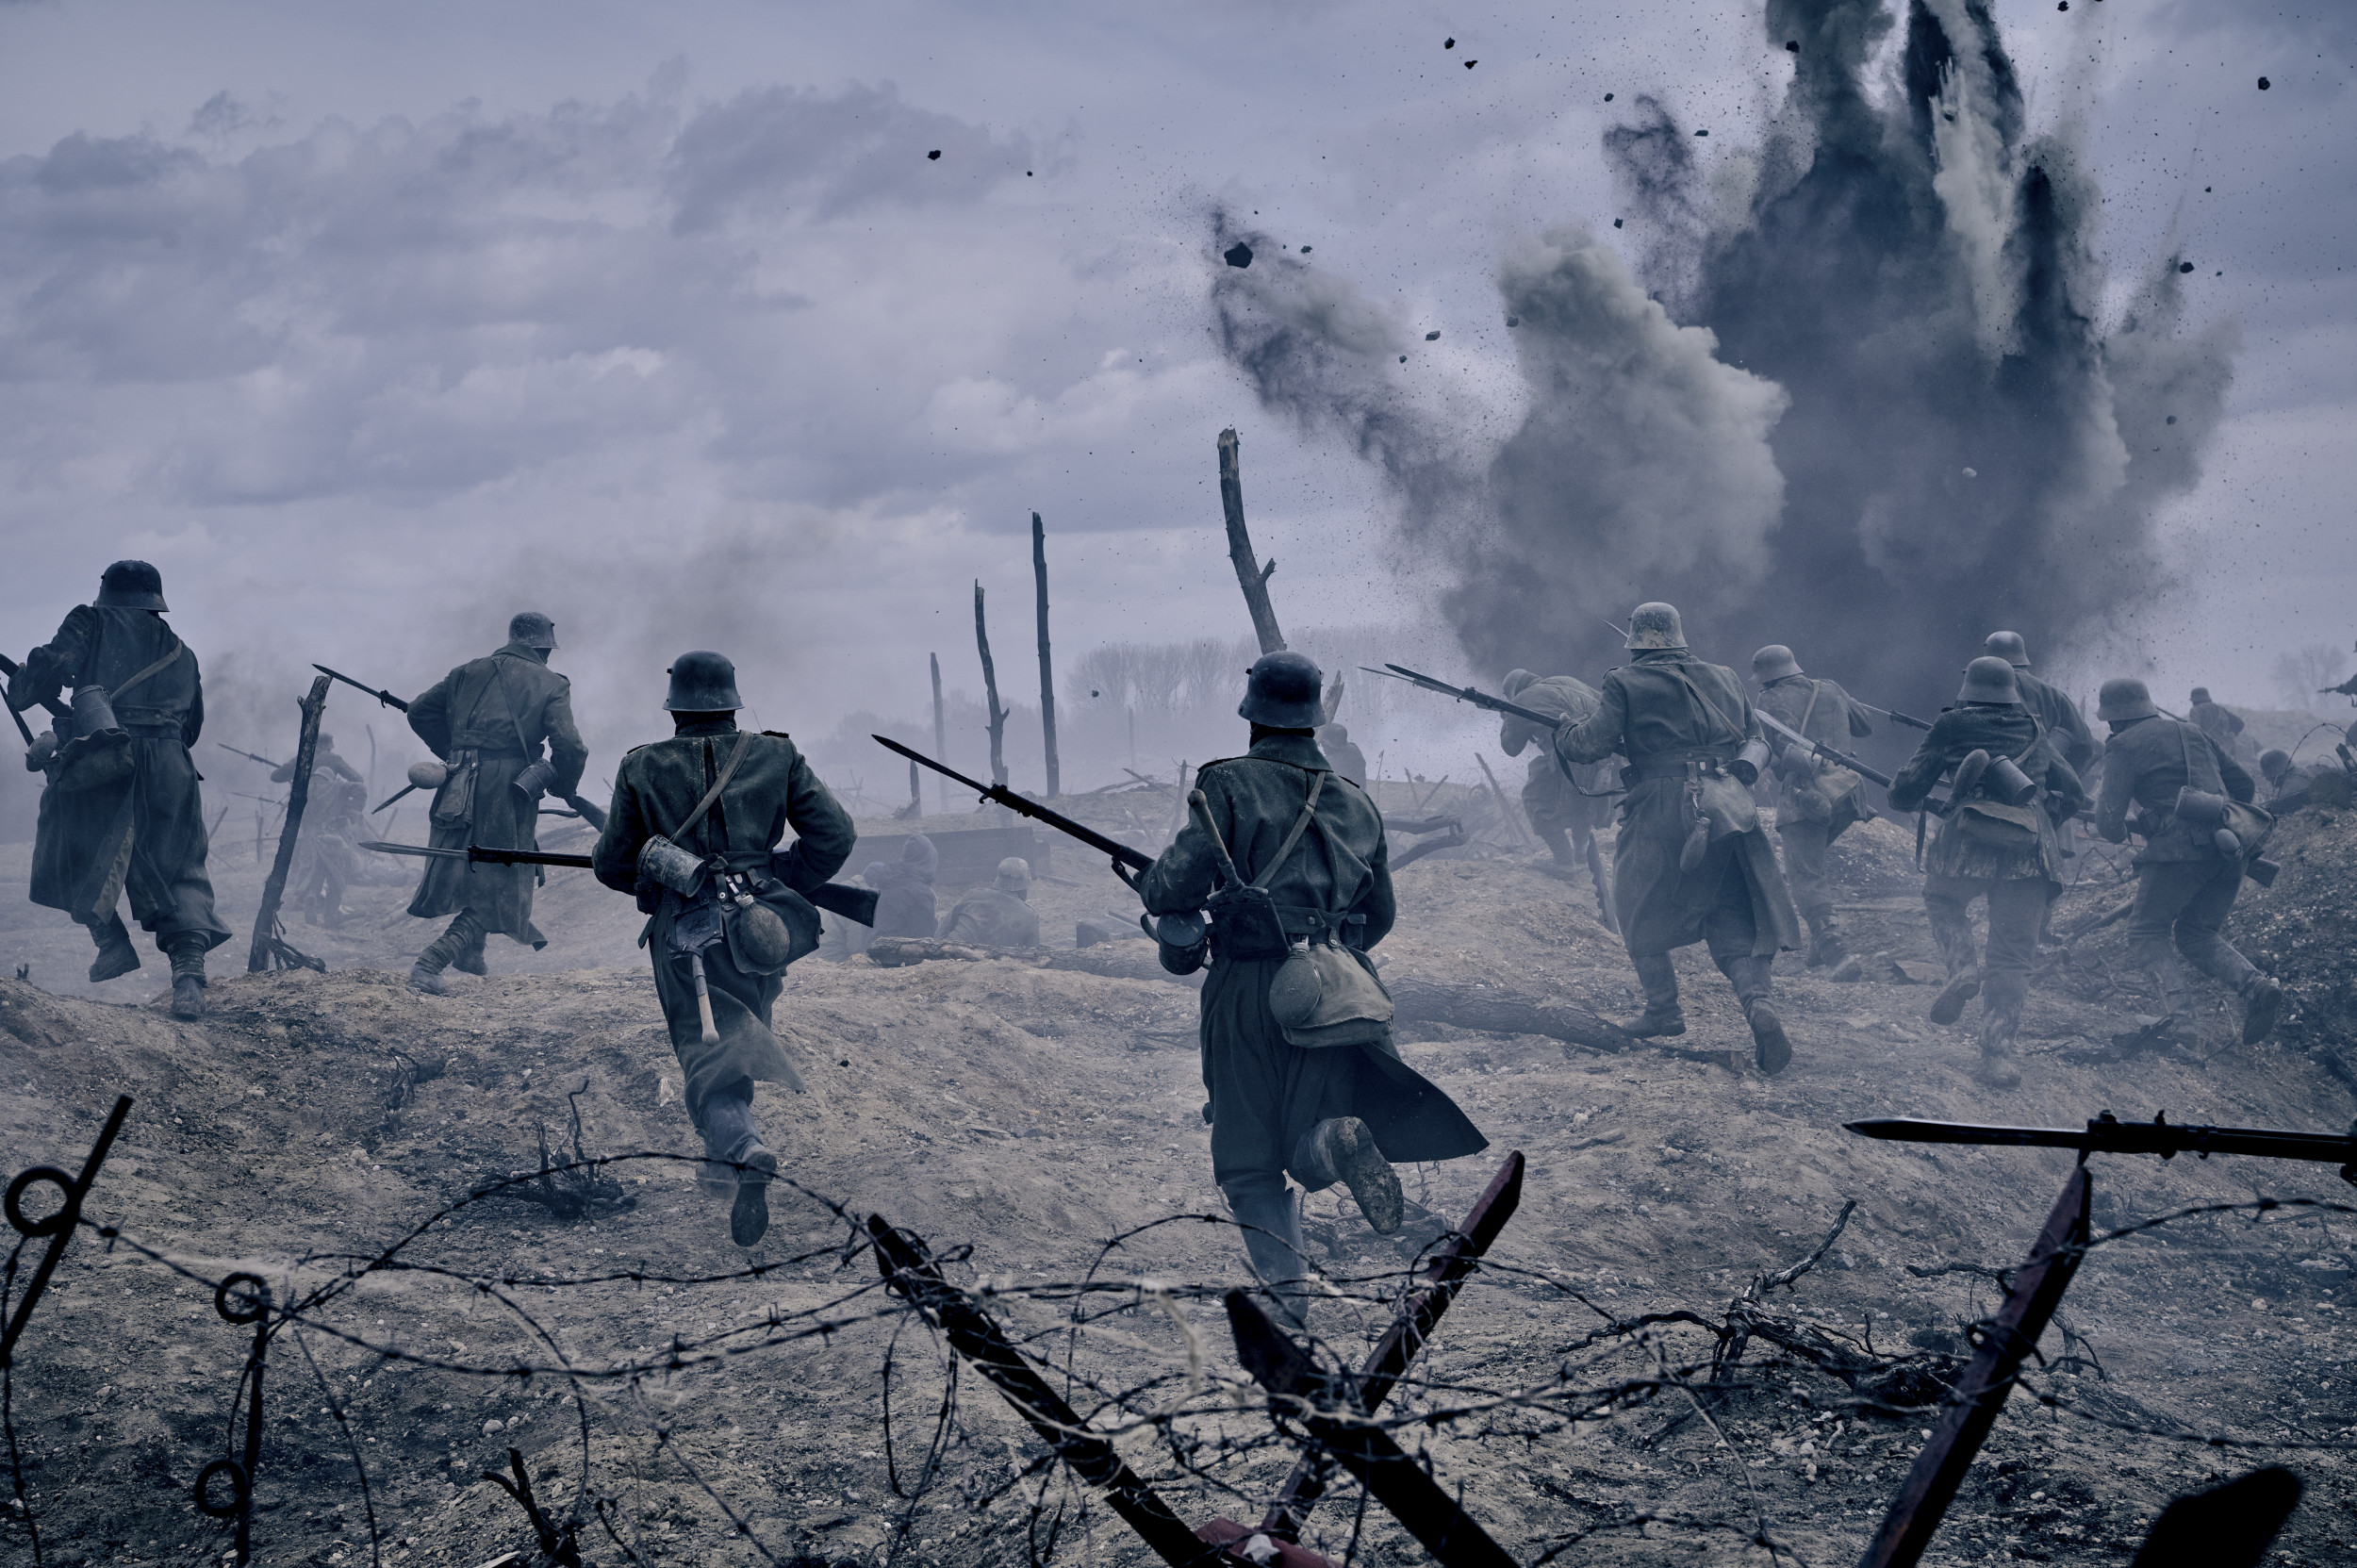 All Quiet on the Western Front' Director on Locations and Filming 'Overwhelming' Battle Scenes